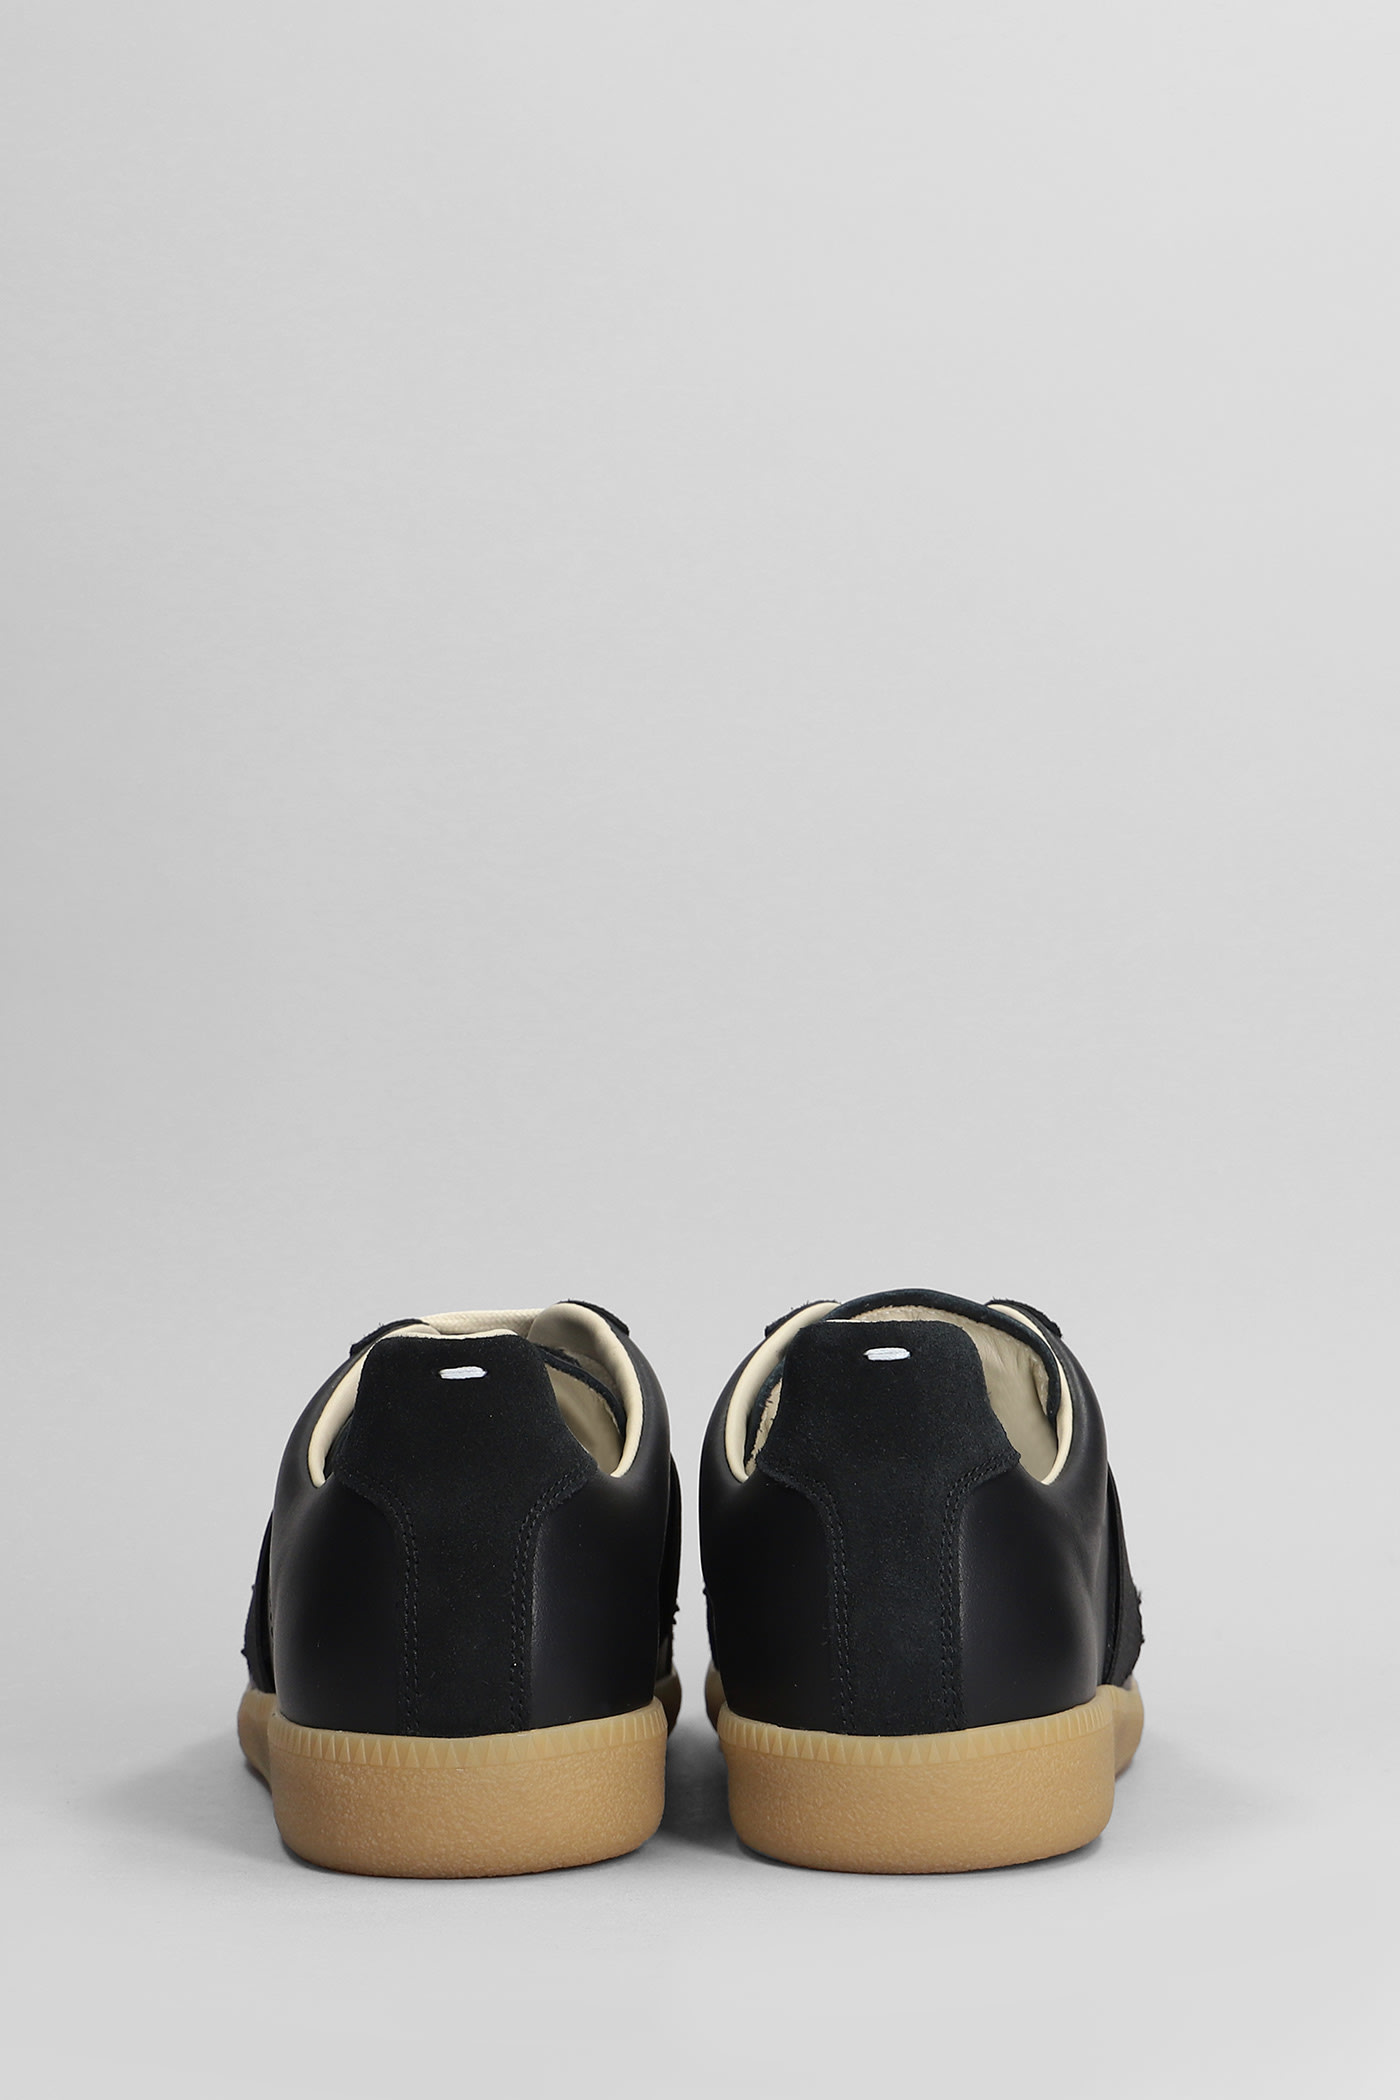 Shop Maison Margiela Replica Sneakers In Black Suede And Leather